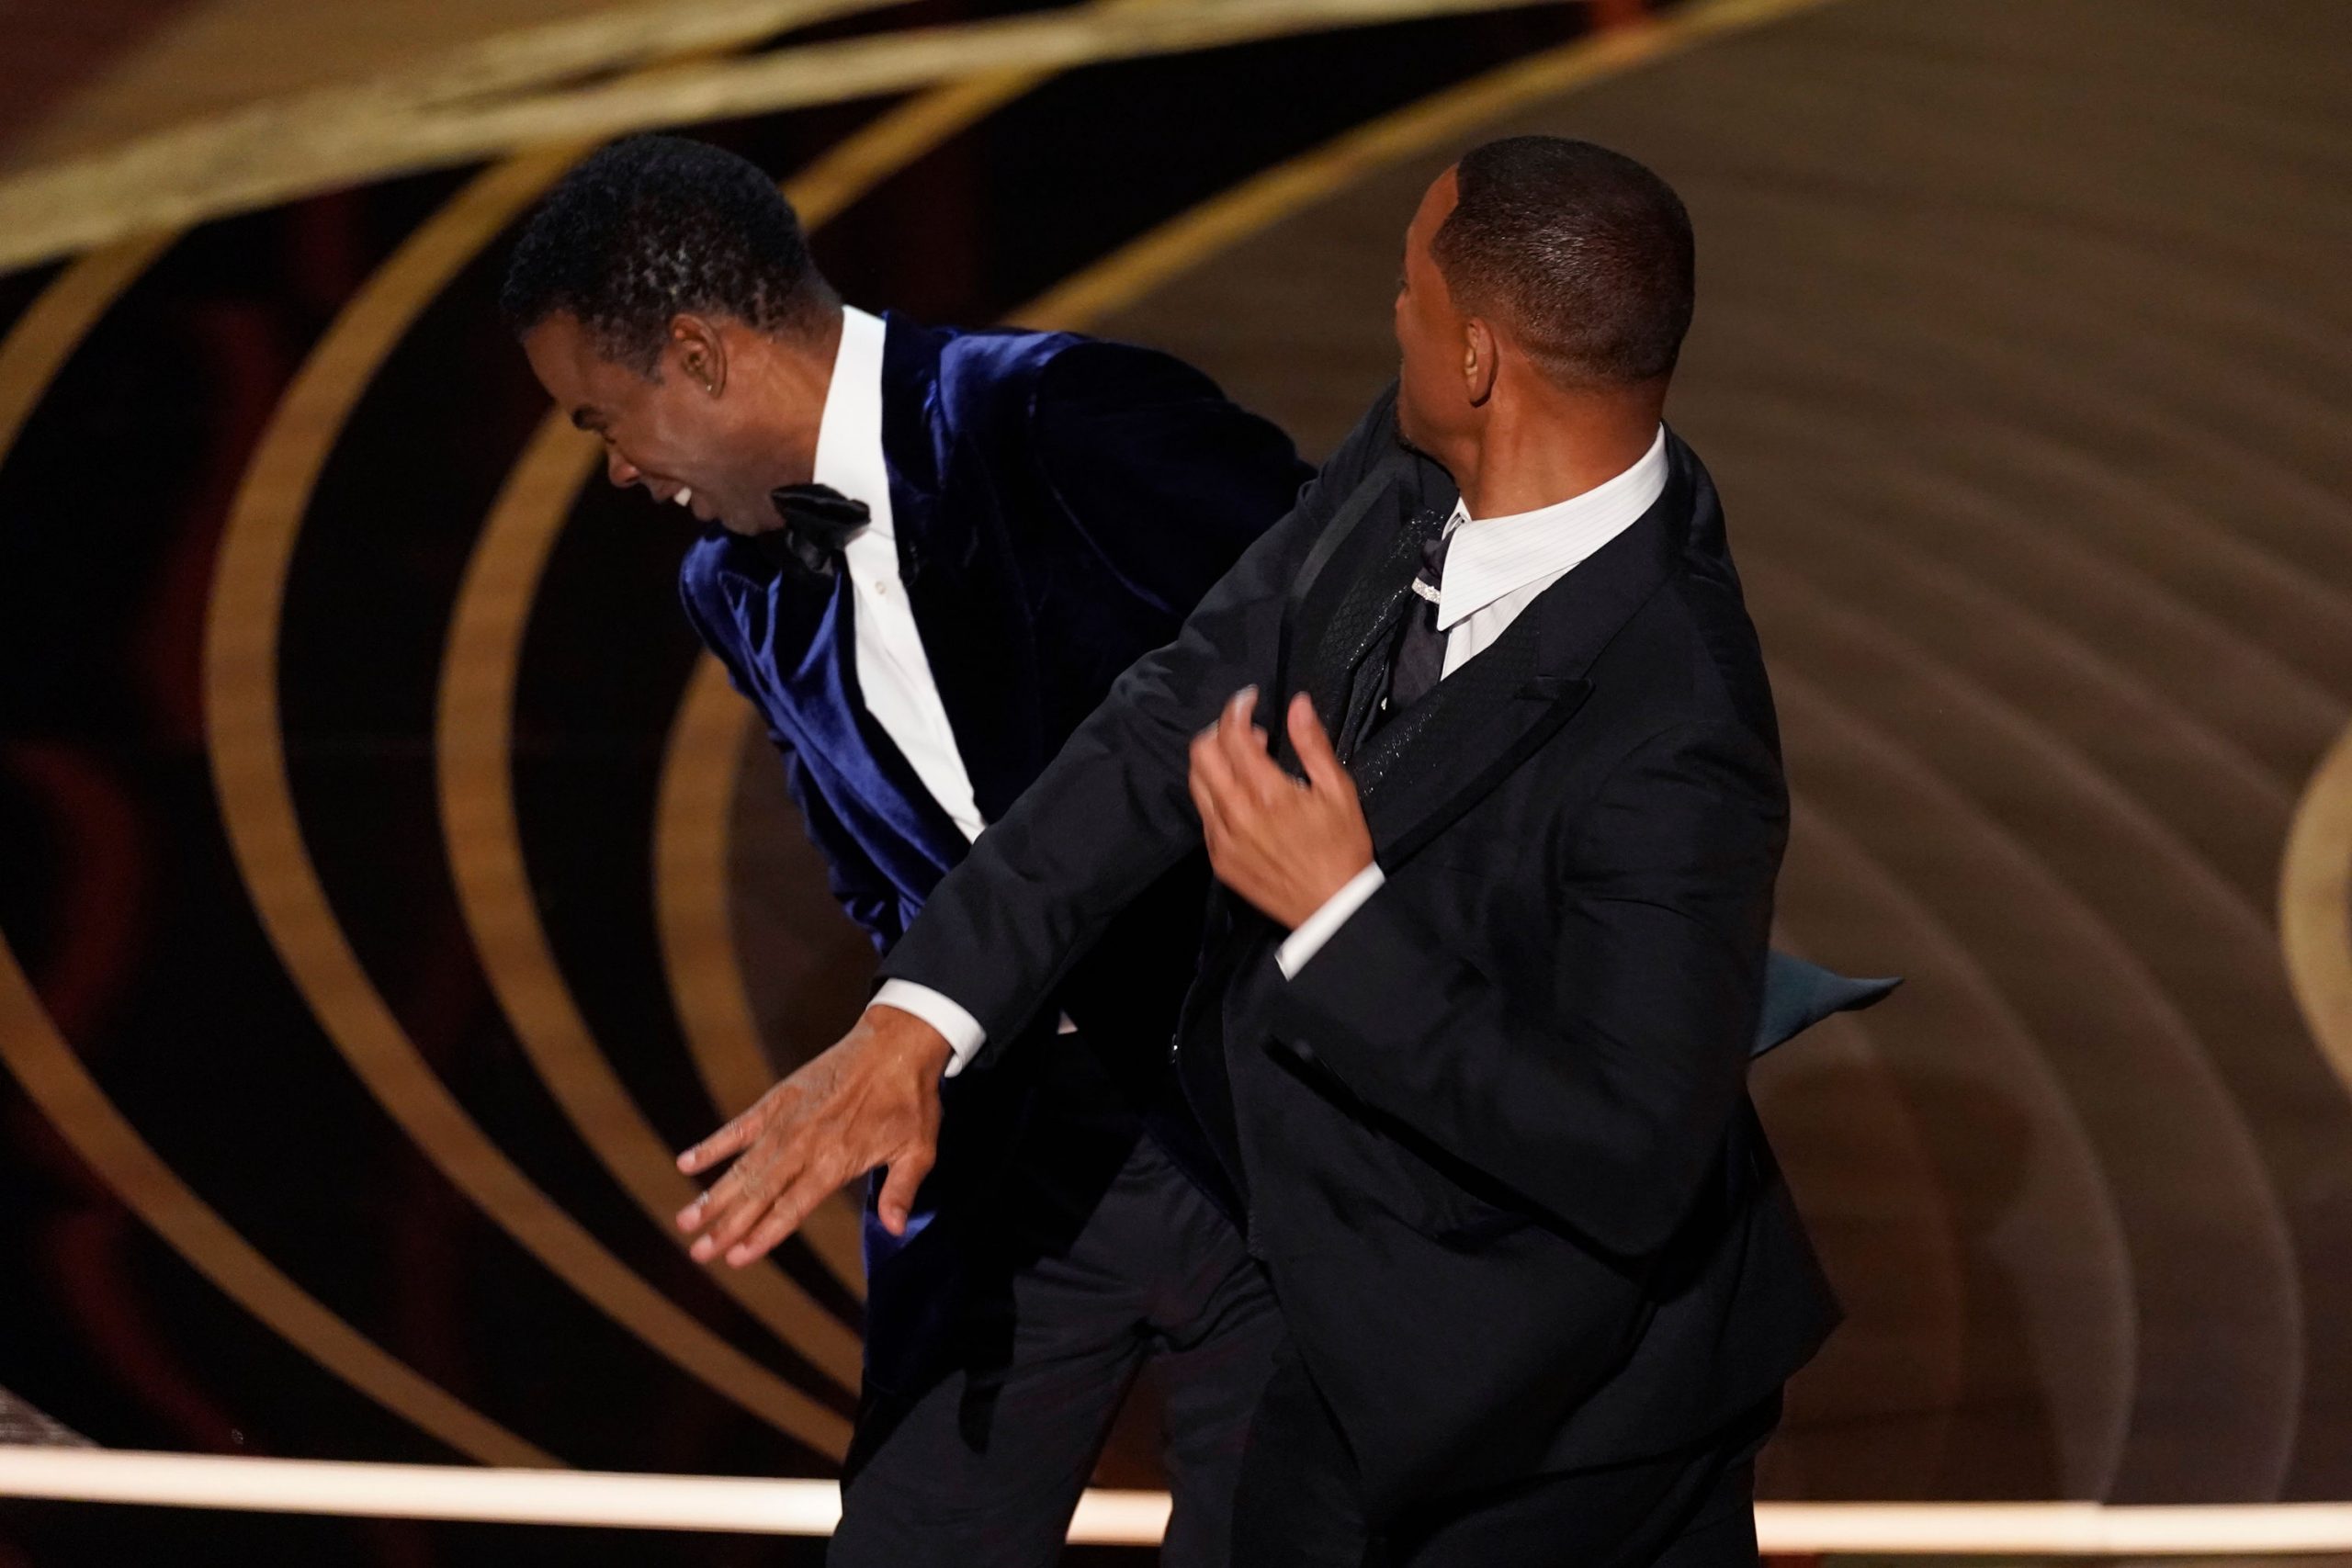 Will Smith slaps Chris Rock at Oscars: Timeline of their friendship